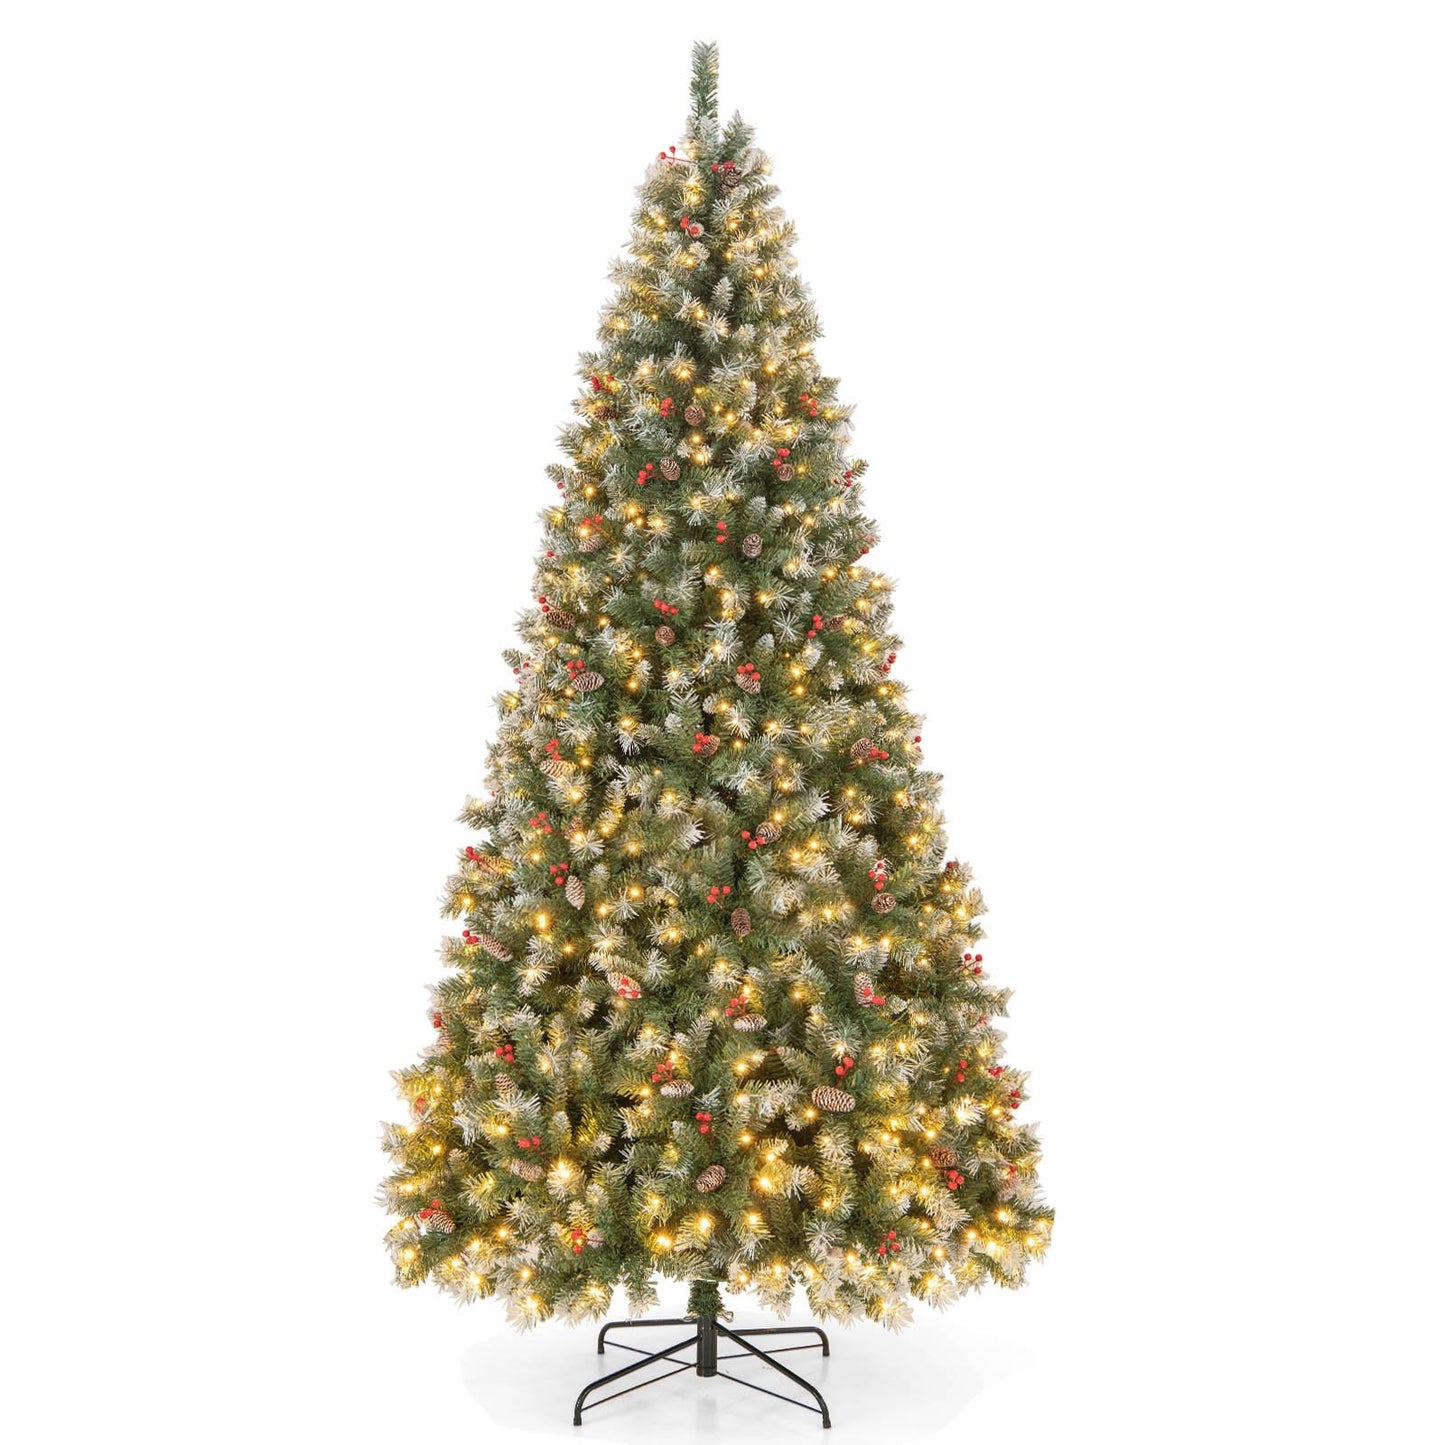 Hinged Christmas Tree with PVC Branch Tips and Warm White LED Lights-9 ft, Green